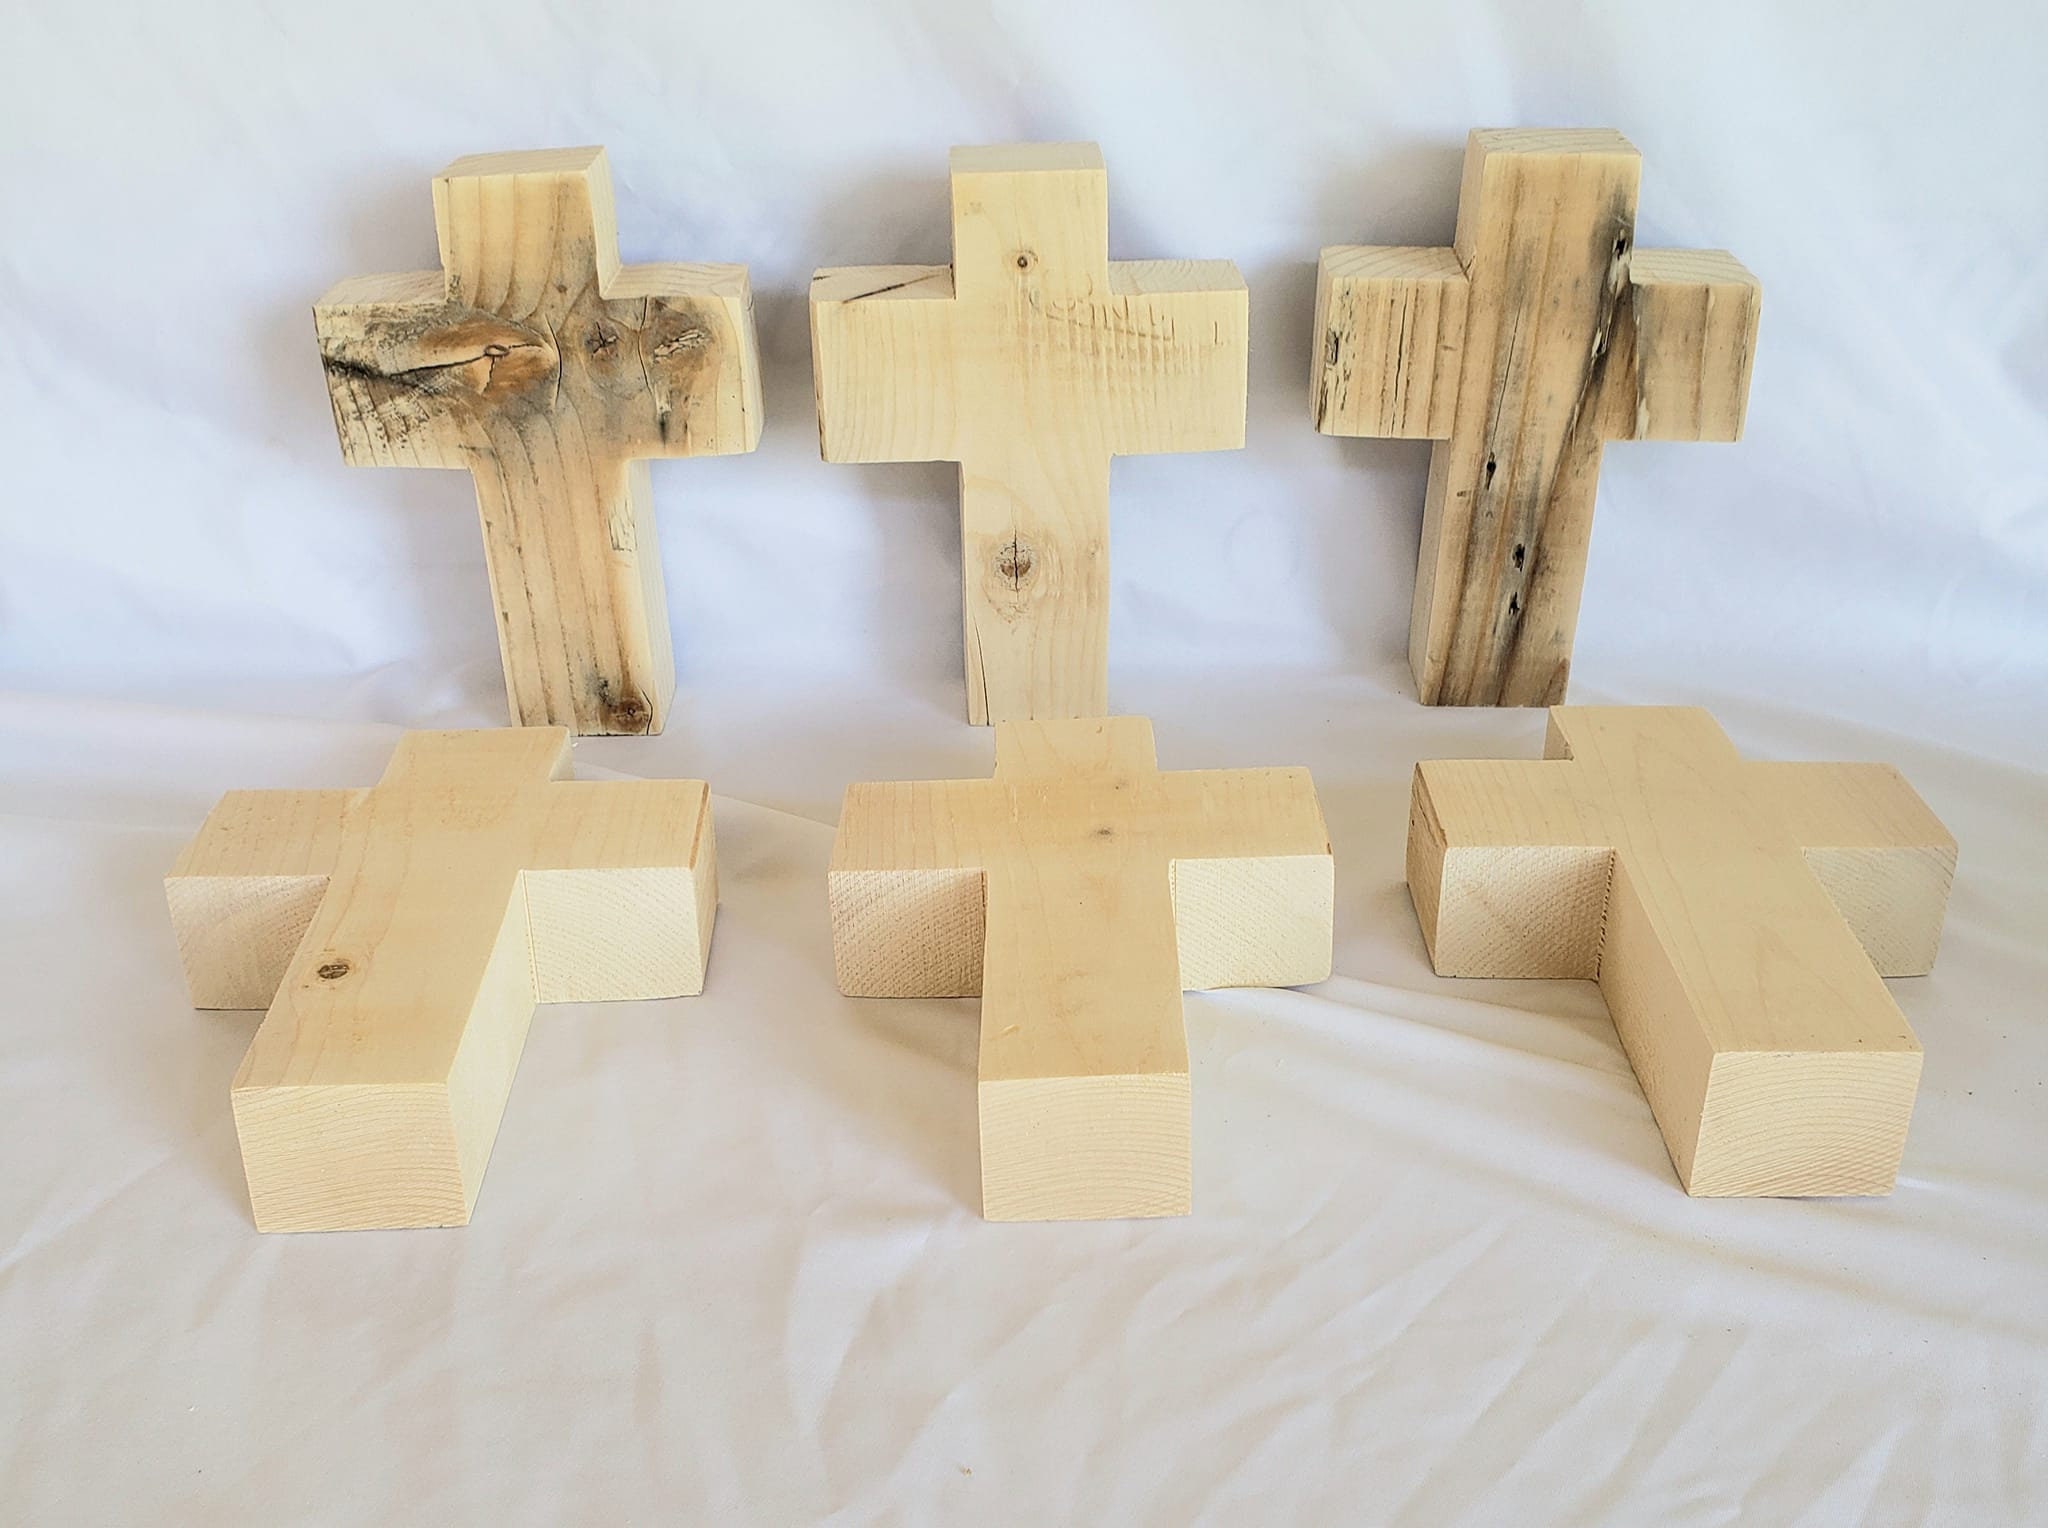 100 Pack Unfinished Wooden Crosses for Crafts - Wood Cross Bulk for Church,  First Communion, Easter Tree, Sunday School, DIY Projects (4x3 in)